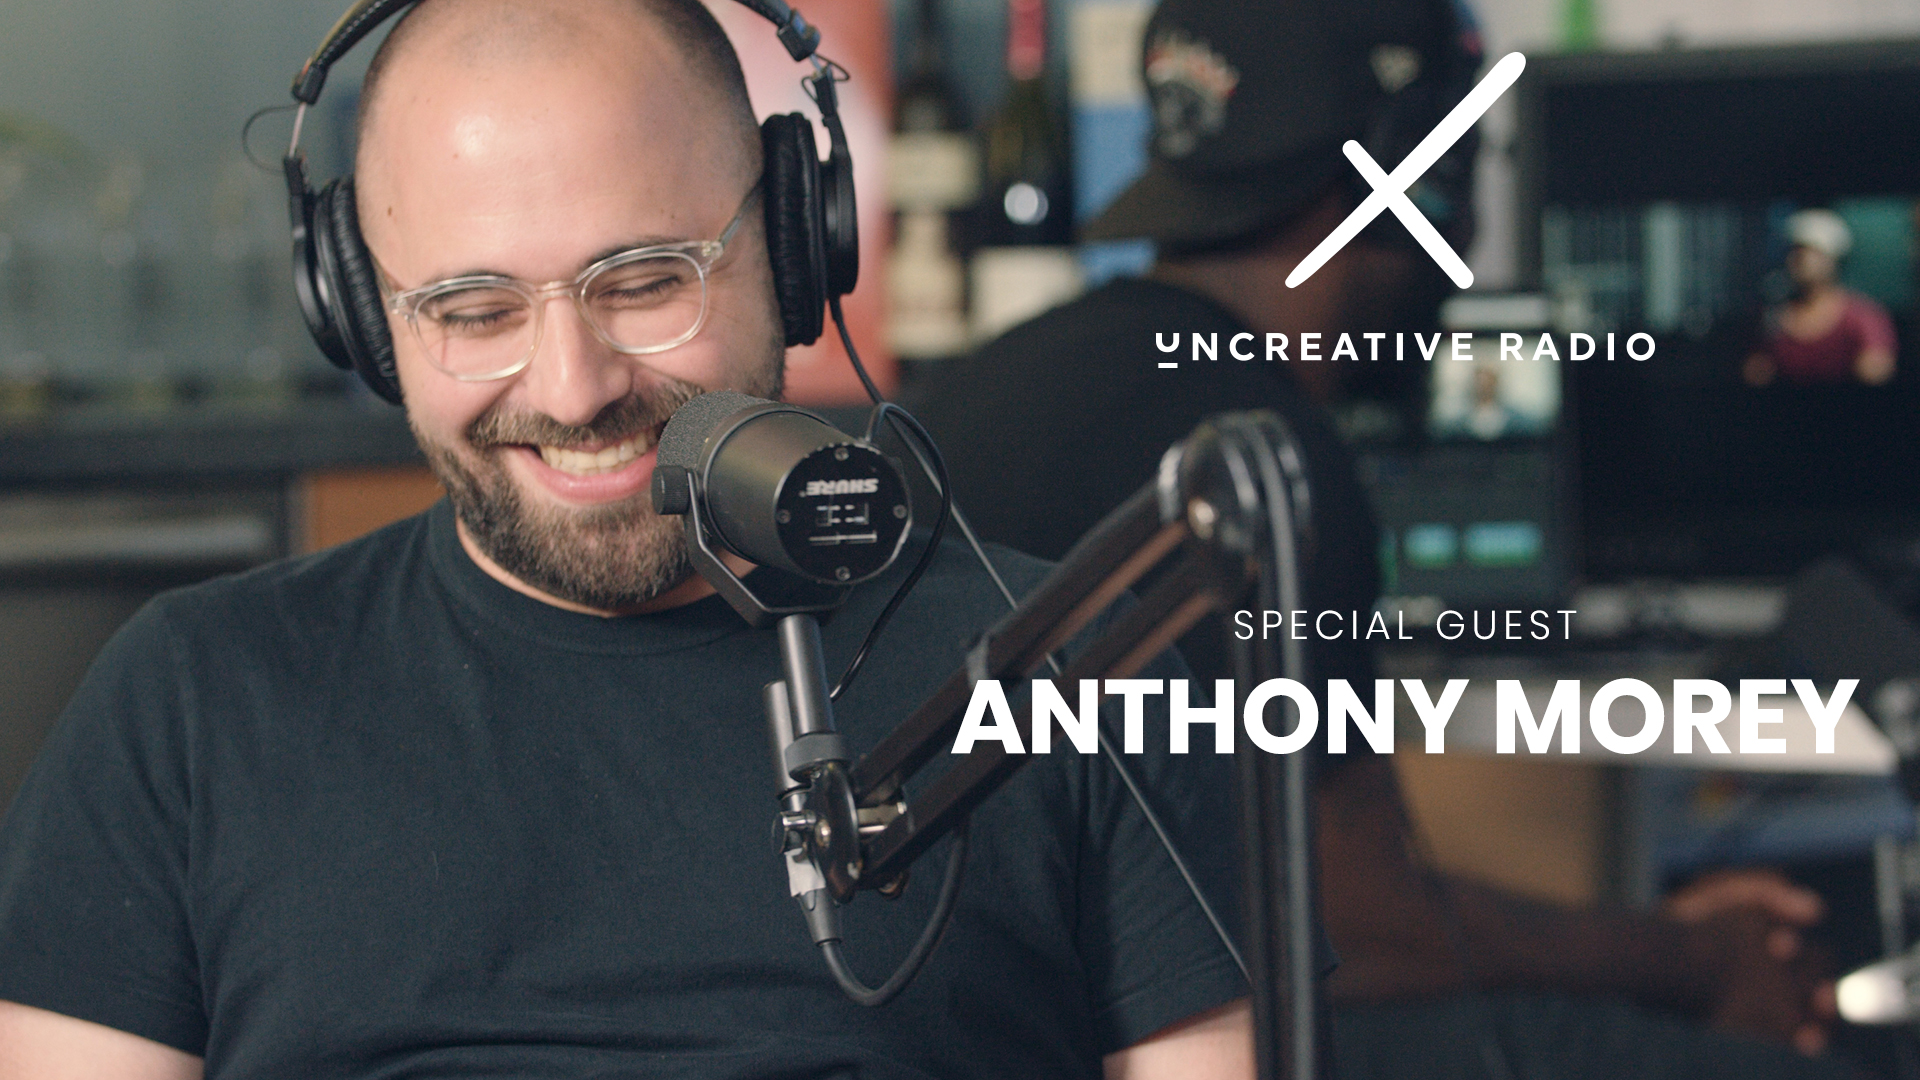 IU C&I Studios Page and Post Uncreative Radio with Anthony Morey title wearing headphones and smiling.